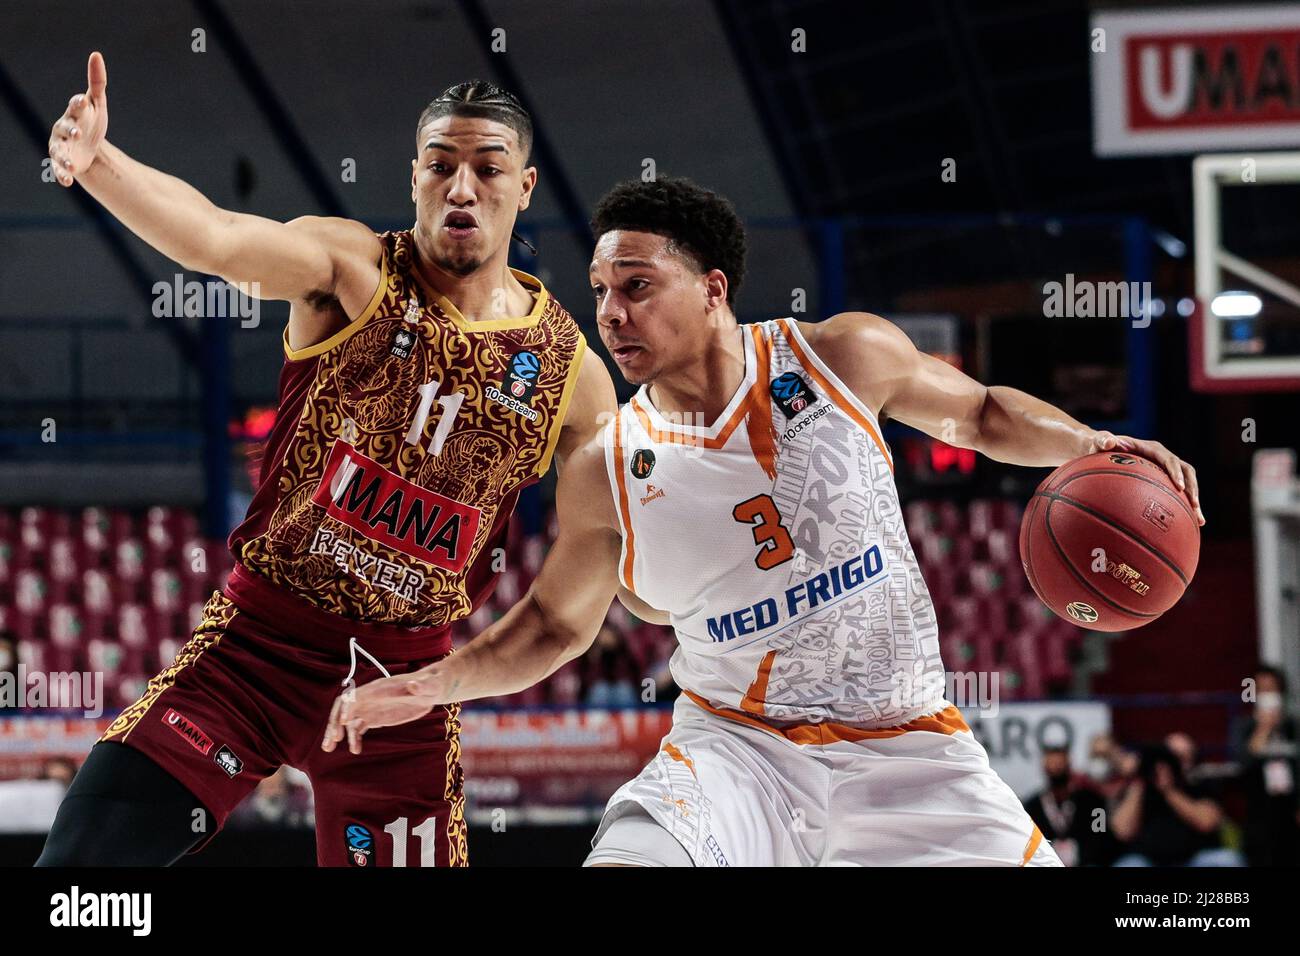 Abdul Gaddy (Promitheas Patras) and Victor Sanders (Umana Reyer Venezia)  during the Basketball EuroCup Championship Umana Reyer Venezia vs Promitheas  Patras on March 30, 2022 at the Palasport Taliercio in Venice, Italy (